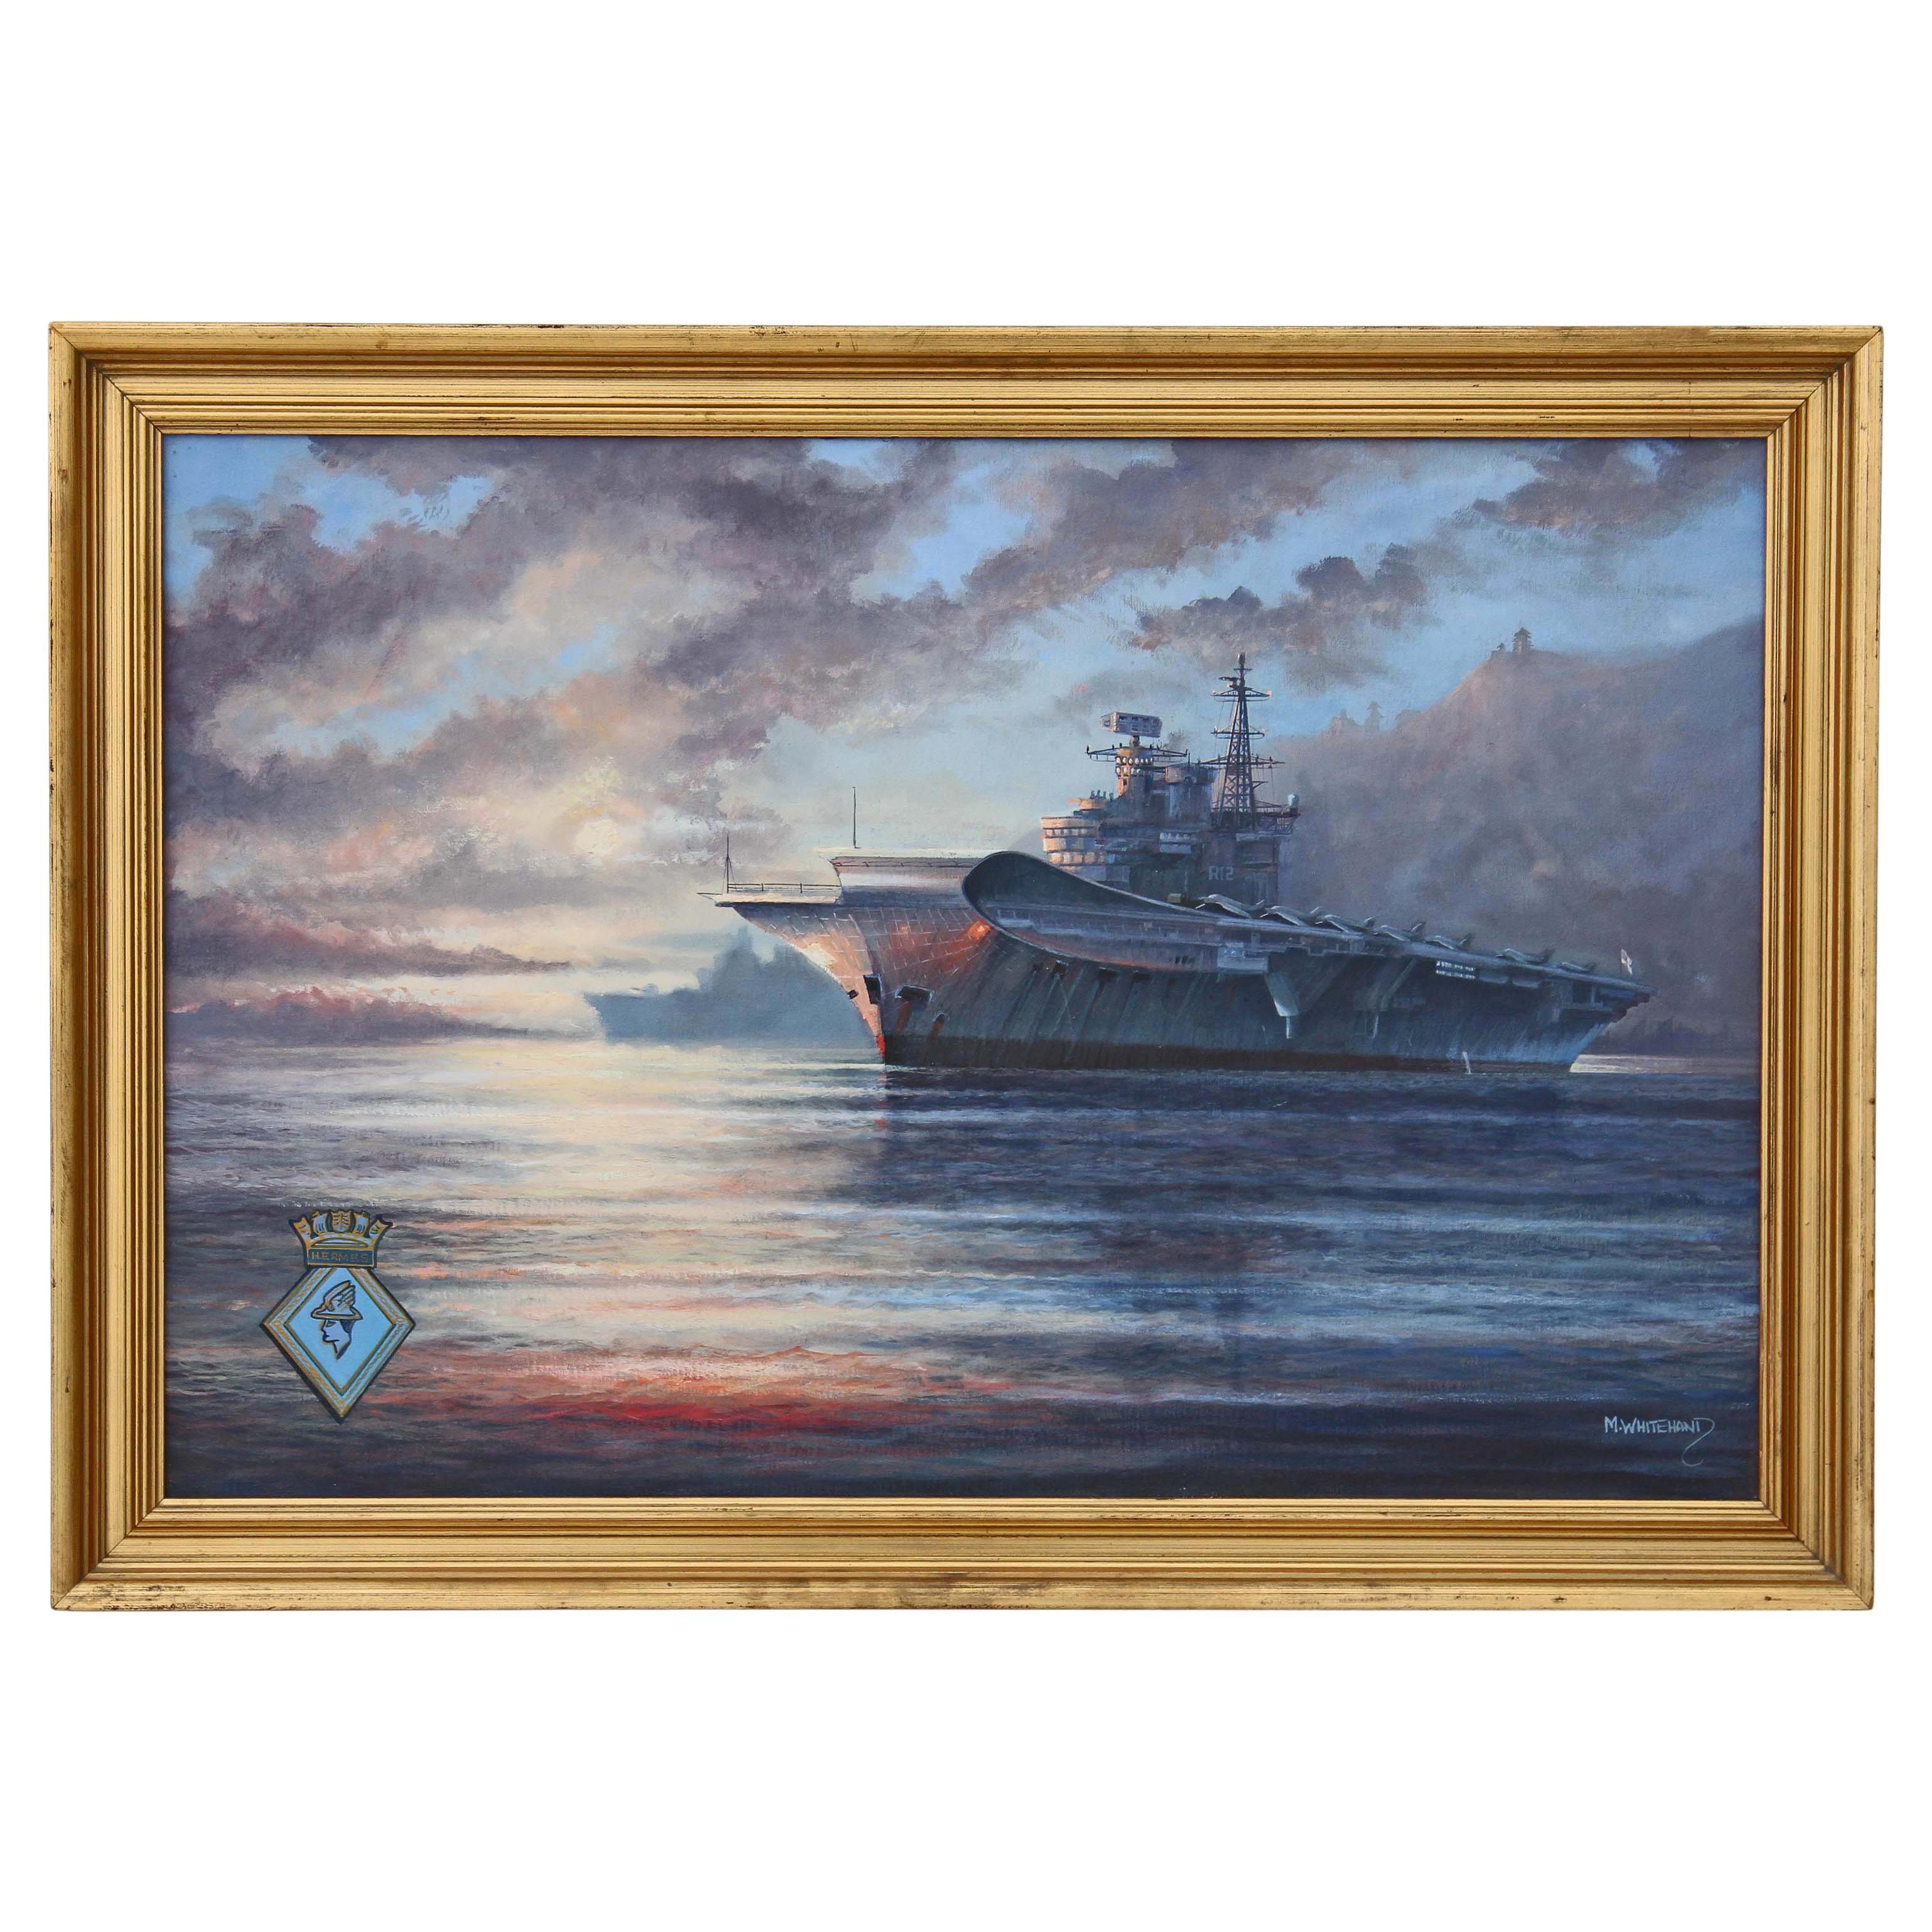 M J Whitehand's High-Quality Large Oil Painting of HMS Hermes Aircraft Carrier